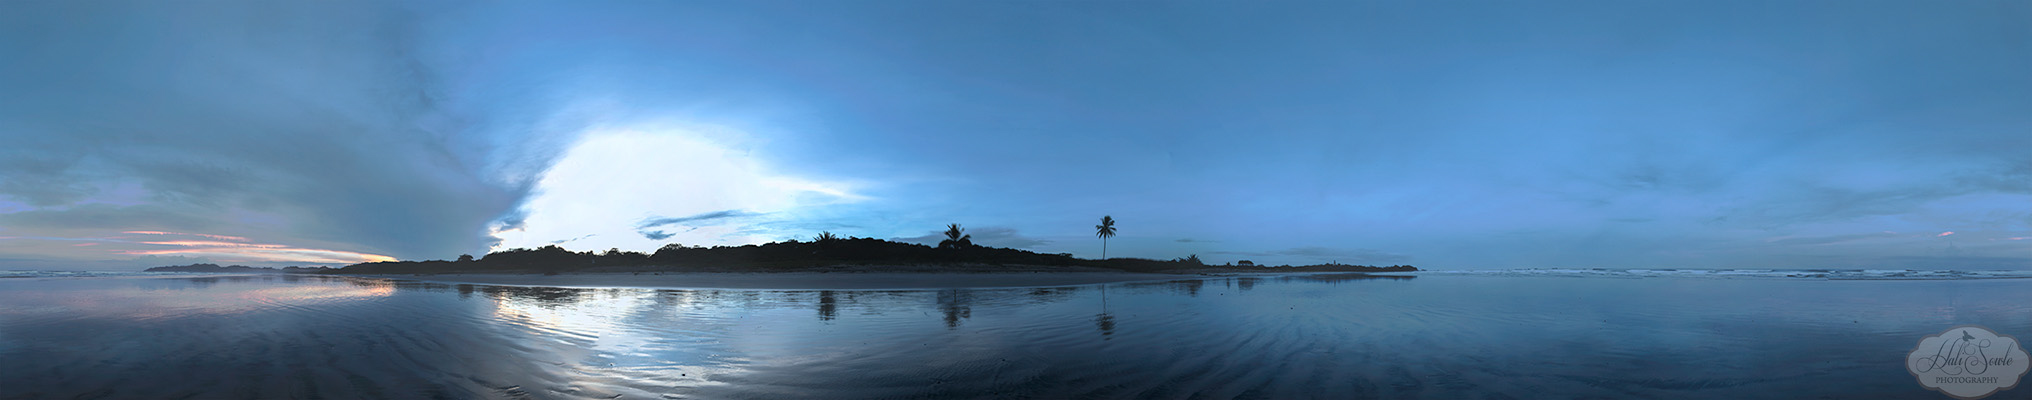 CostaRica2013_27a.jpg - 360 Panoramic of the beach at sunrise.  This was taken from the waters edge at low tide.